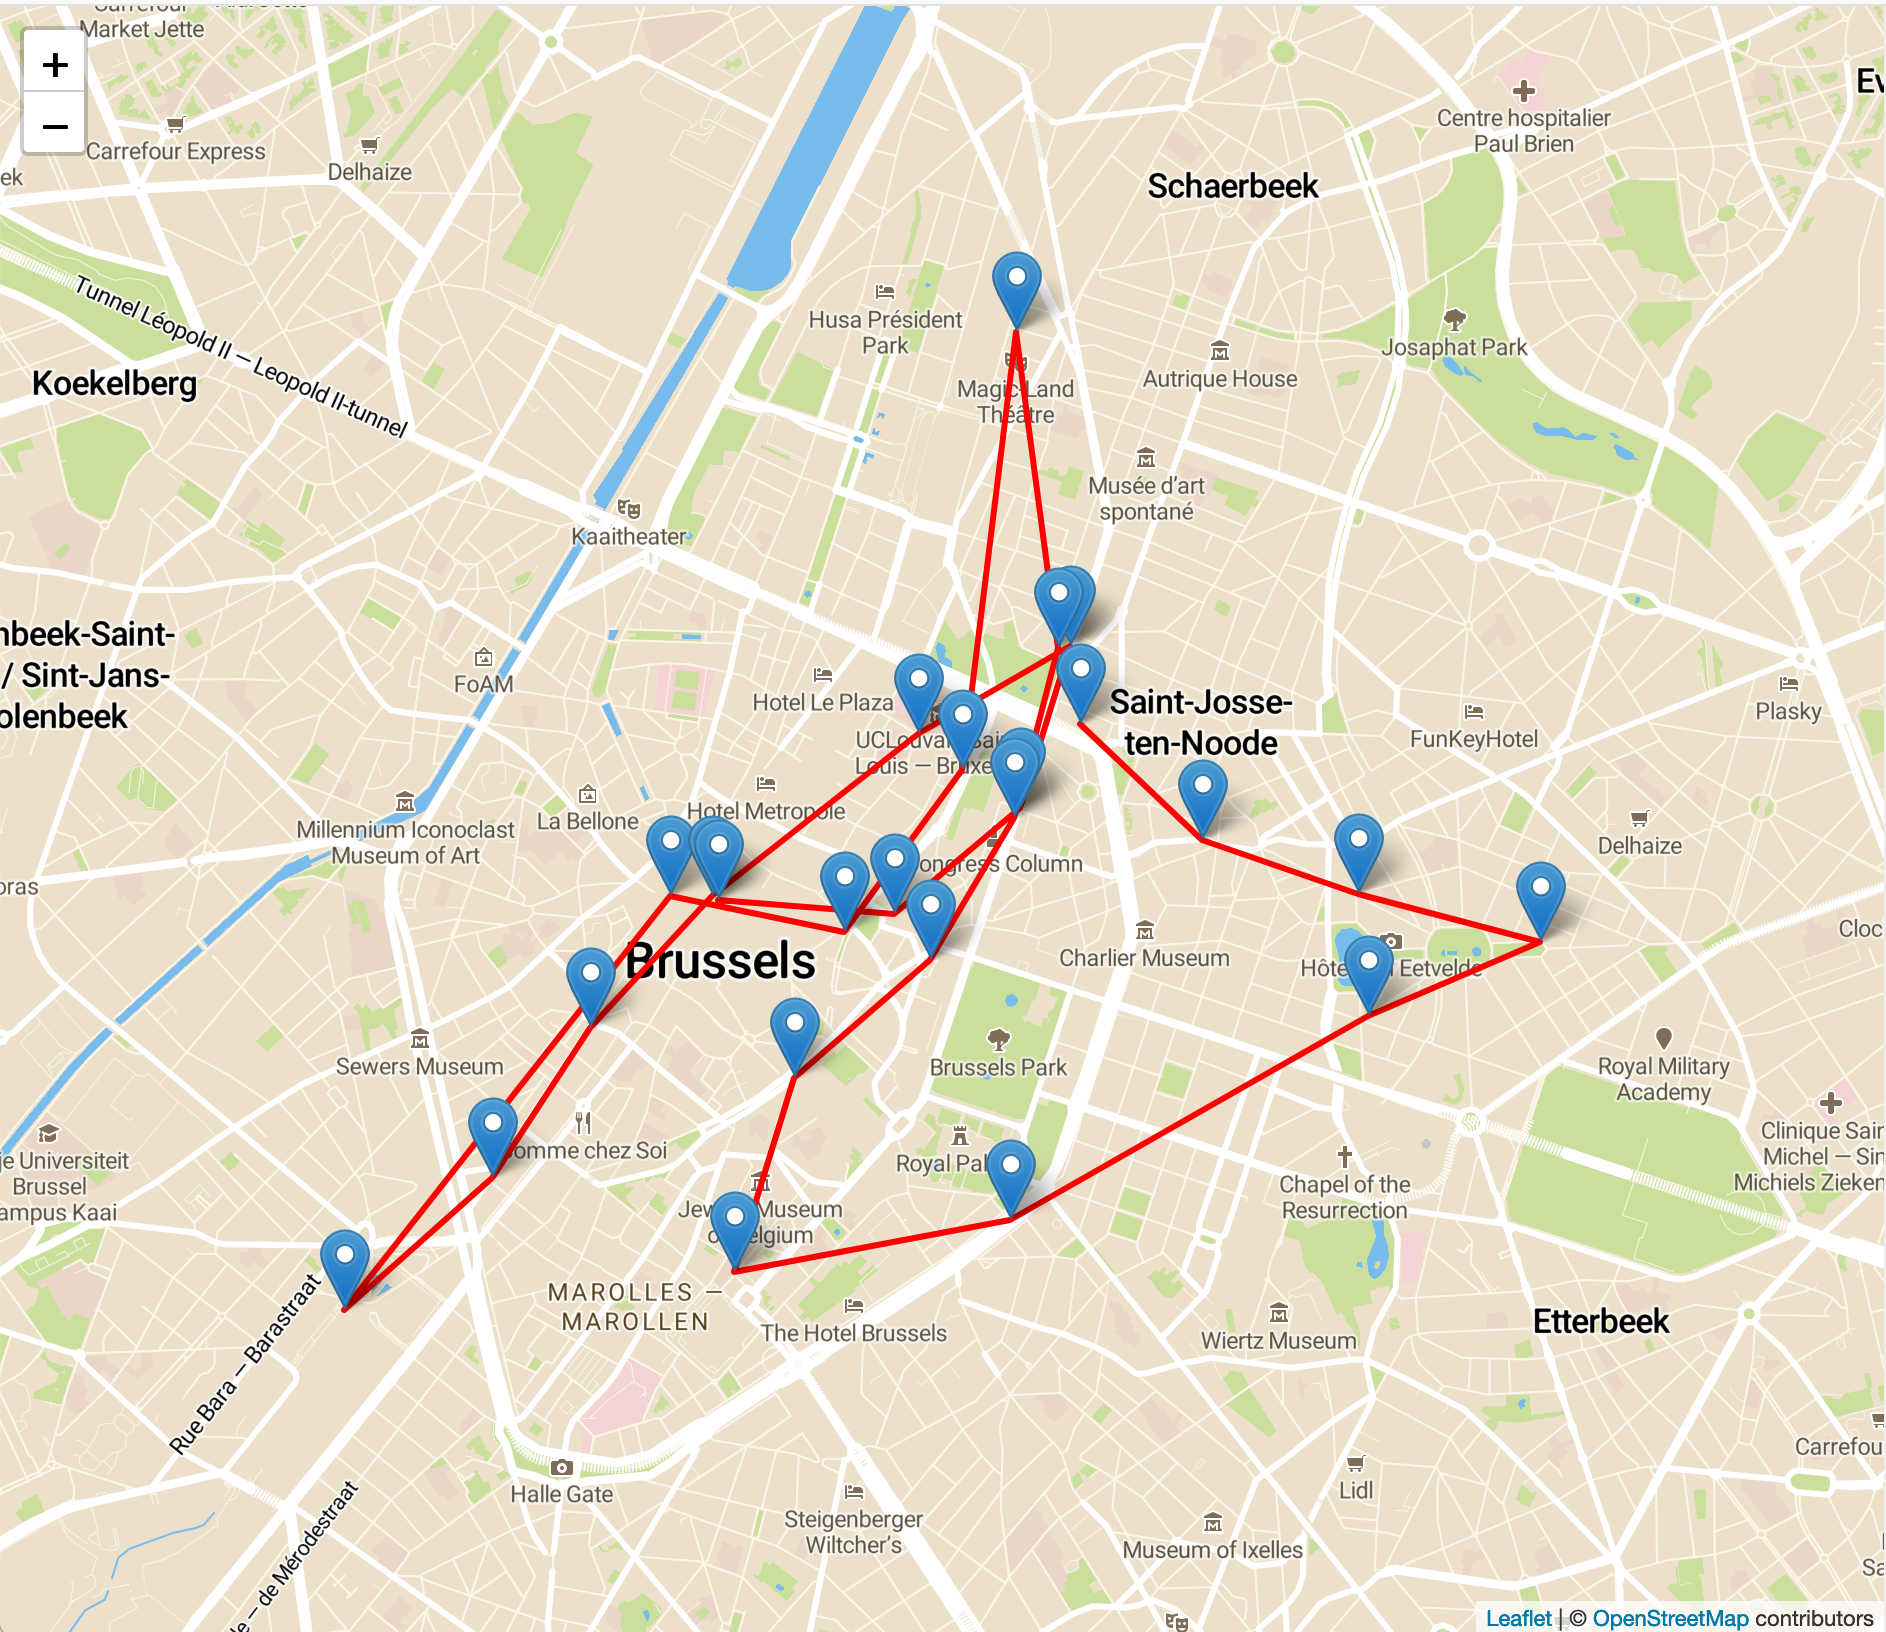 A map of Brussels with some location markers